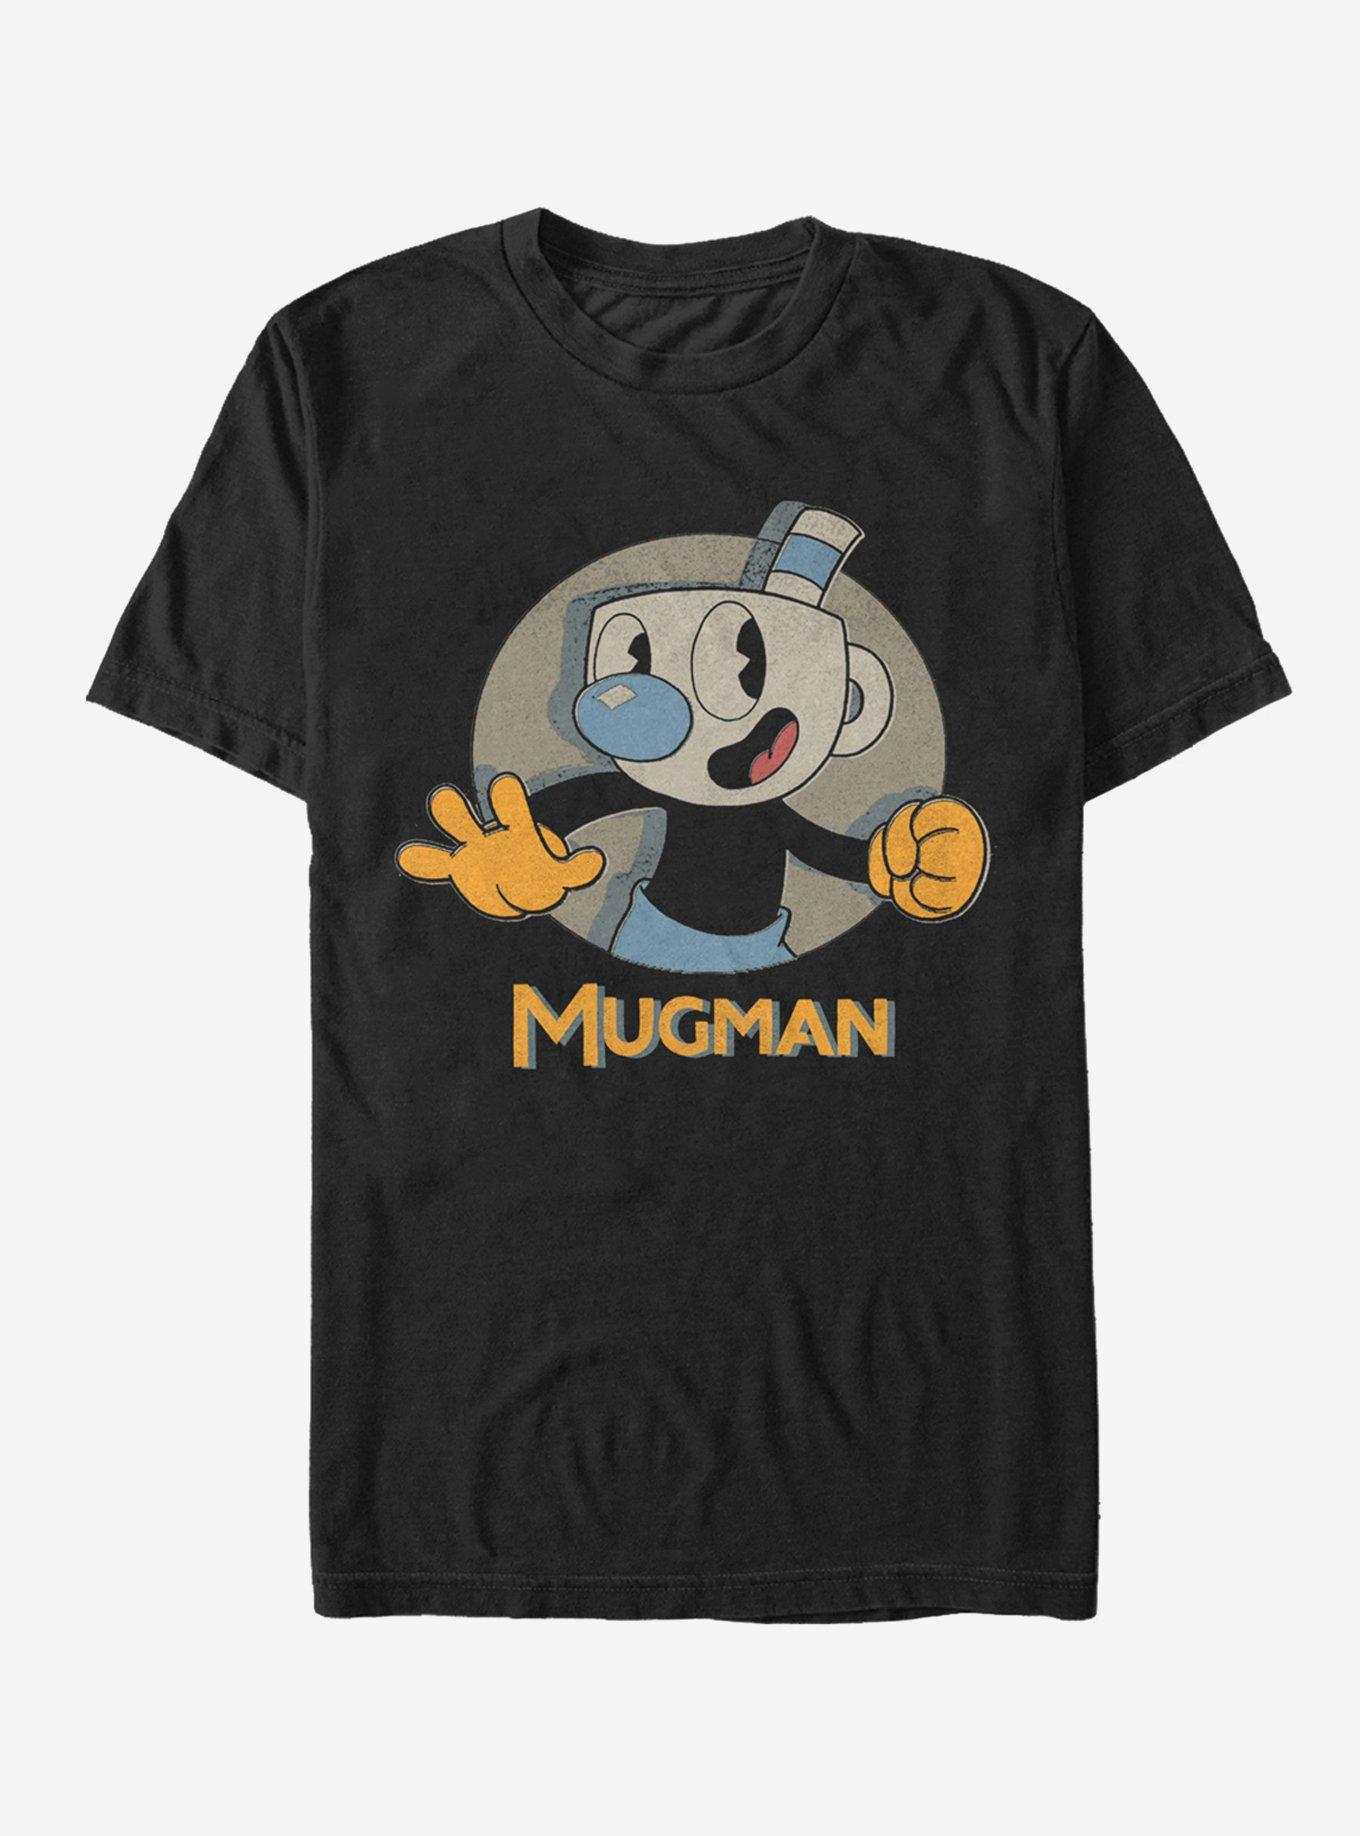 Men's The Cuphead Show! Mugman Sketches Graphic Tee Athletic